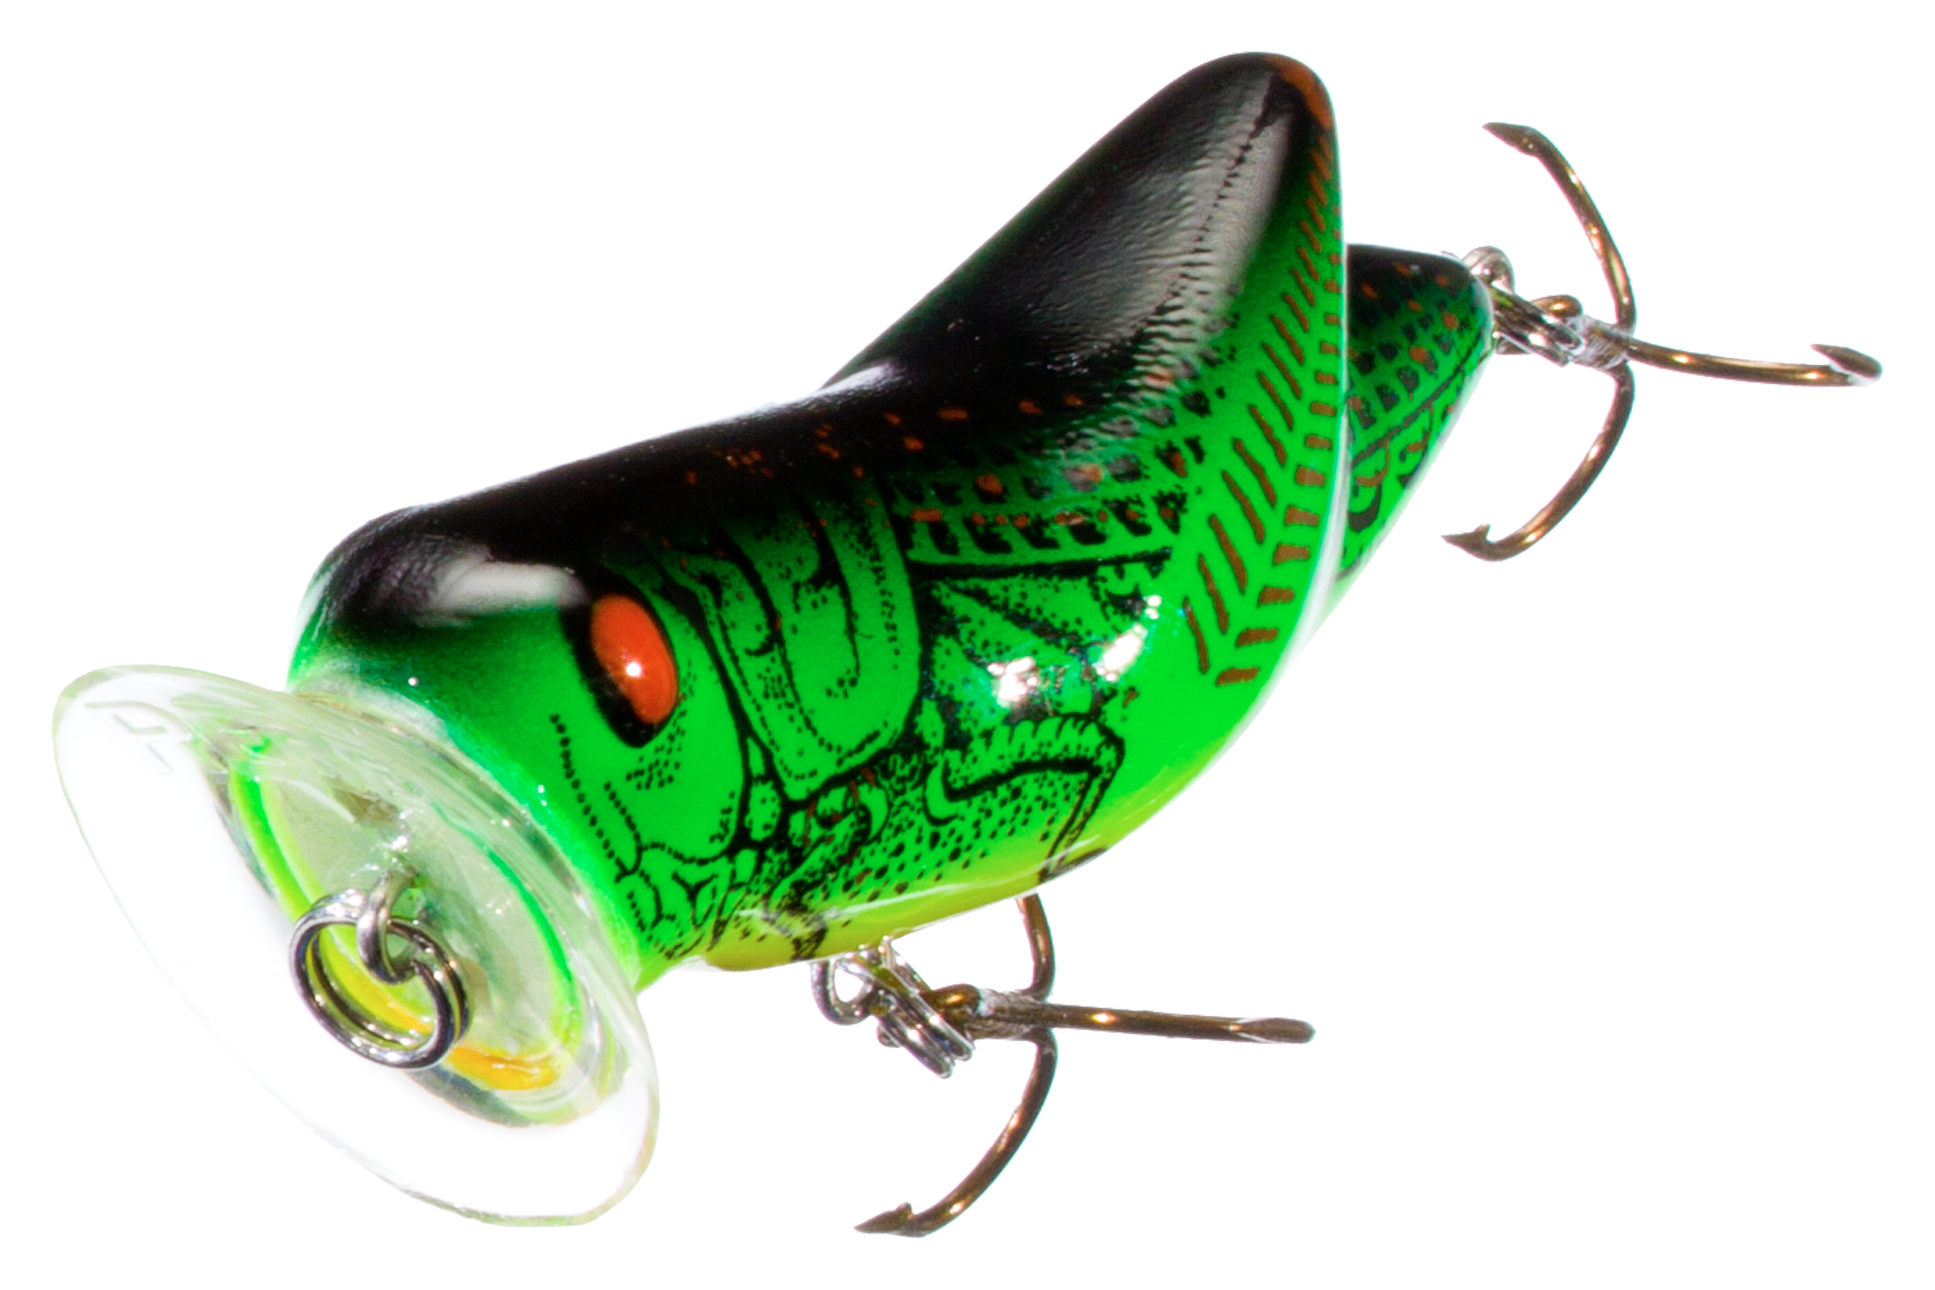 REBEL LURES WIND-CHEATER SCHOOL-E-POPPER Fishing Lure – Toad Tackle